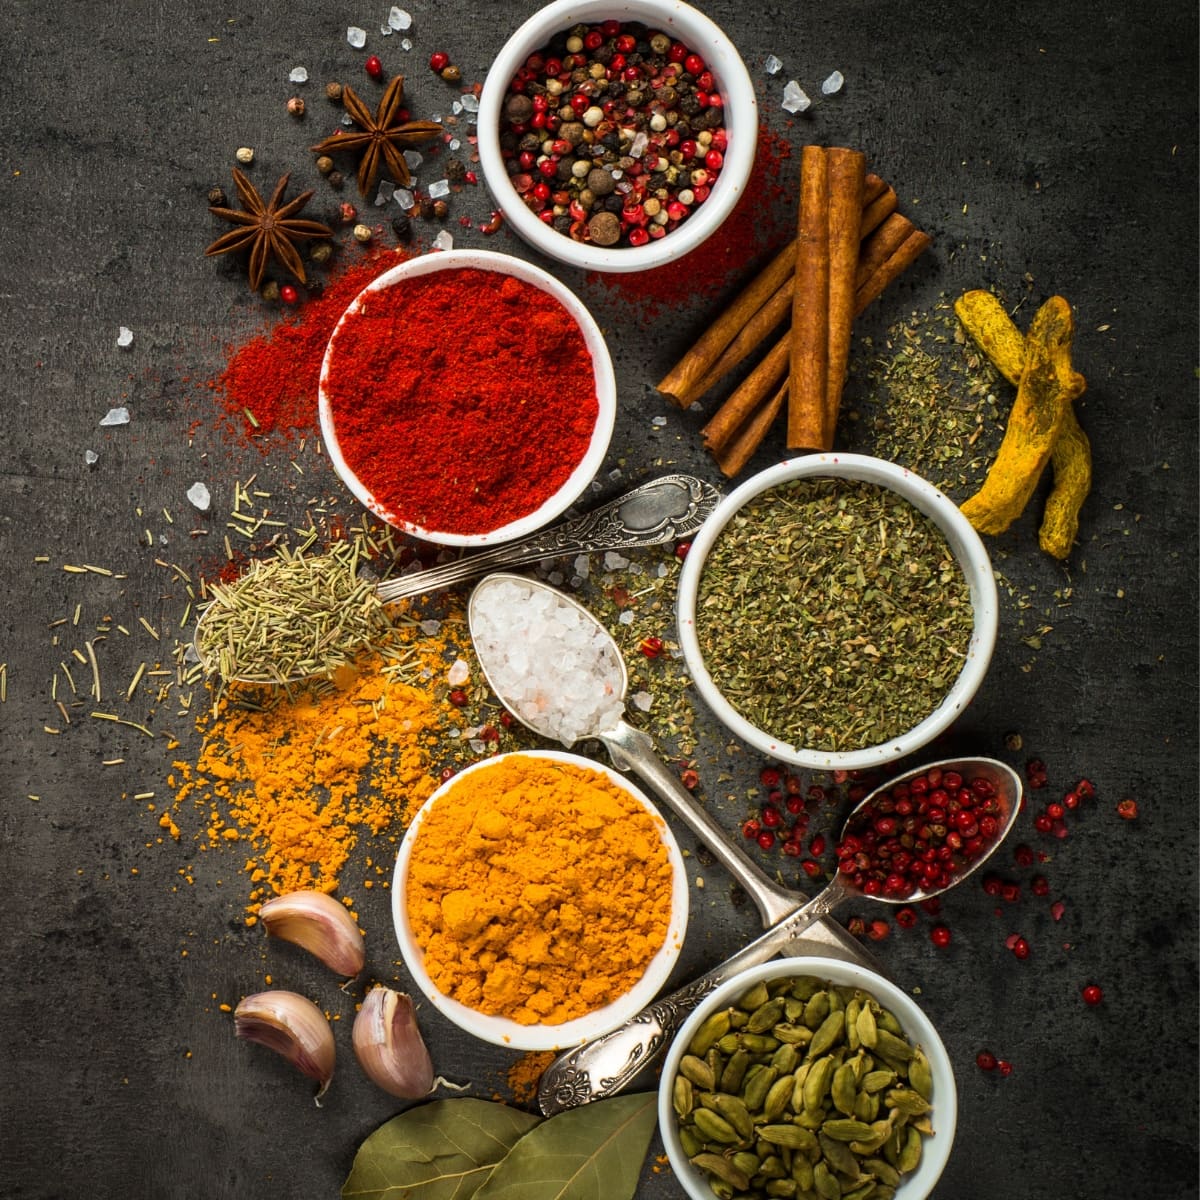 Ultimate List of Spices for Cooking (25 Kitchen Essentials) featuring Various Spices and Herbs in Bowls and Spread Over a Dark Background with Spoons of Herbs, Spices, and Salt